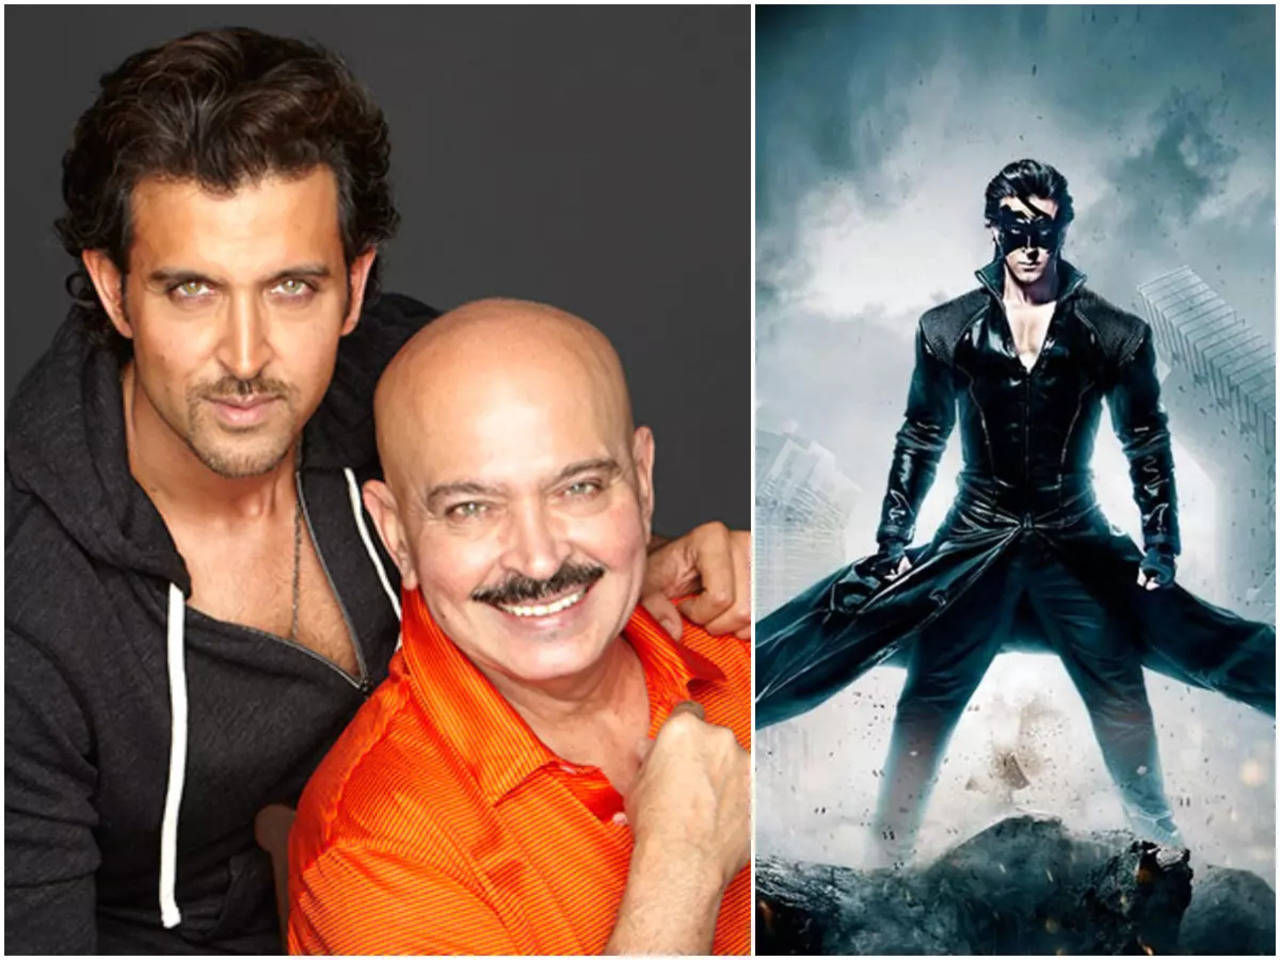 The Best 999 Krrish Images Incredible Collection Of Krrish Images In Full 4k